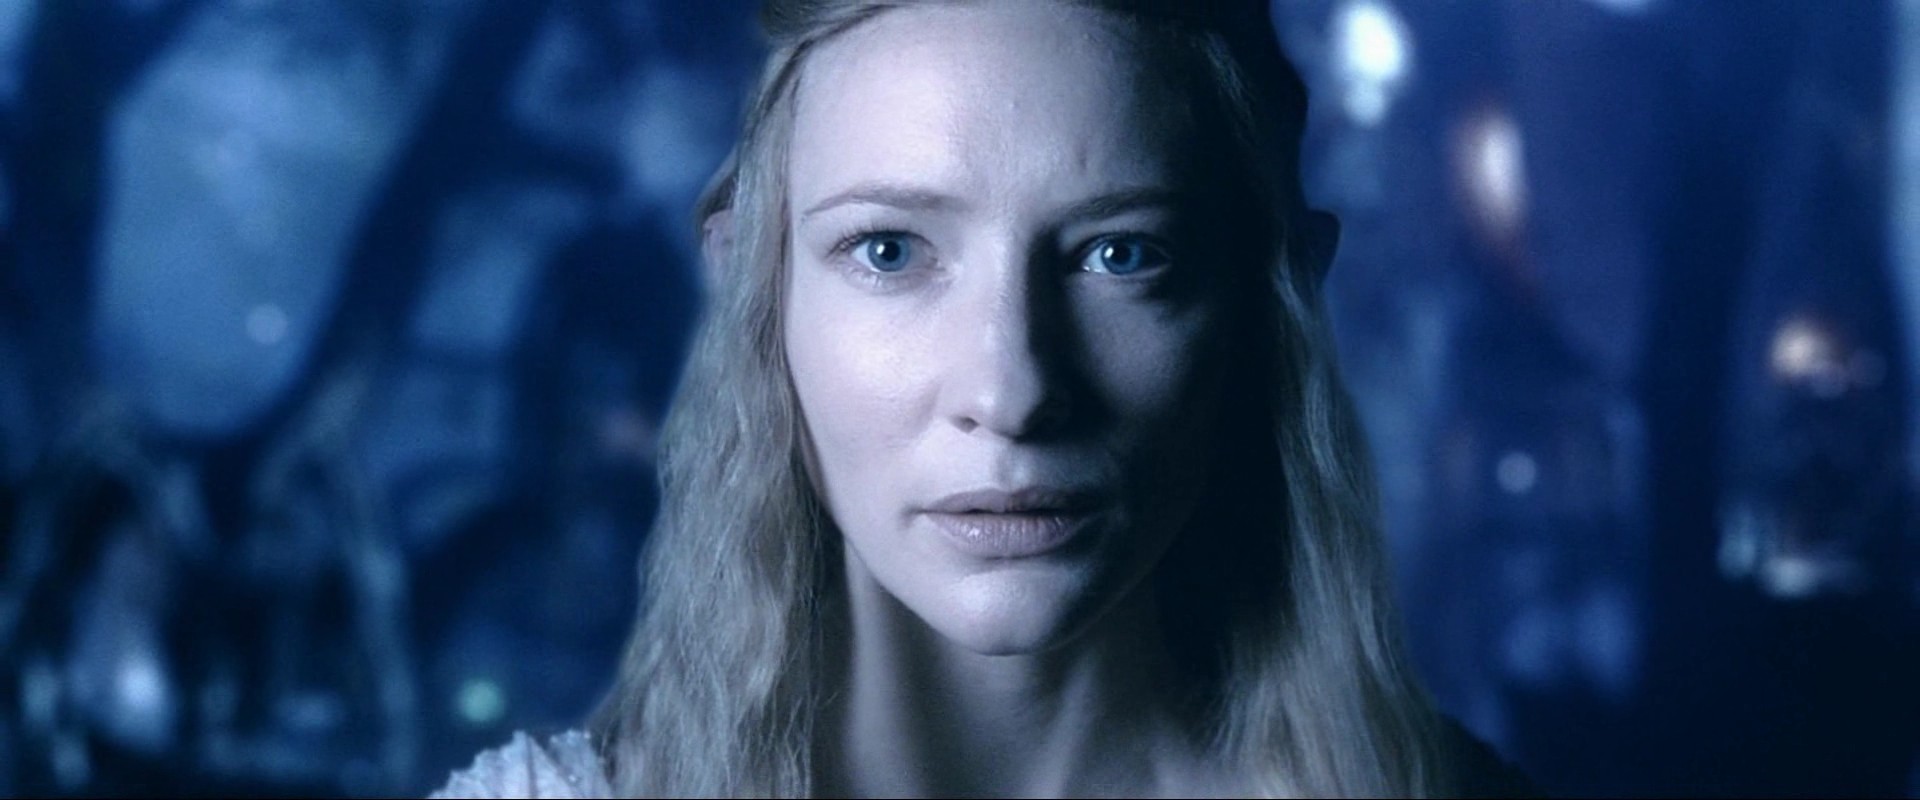 General 1920x800 The Lord of the Rings: The Fellowship of the Ring movies women Galadriel Cate Blanchett fantasy girl face blue eyes blonde film stills